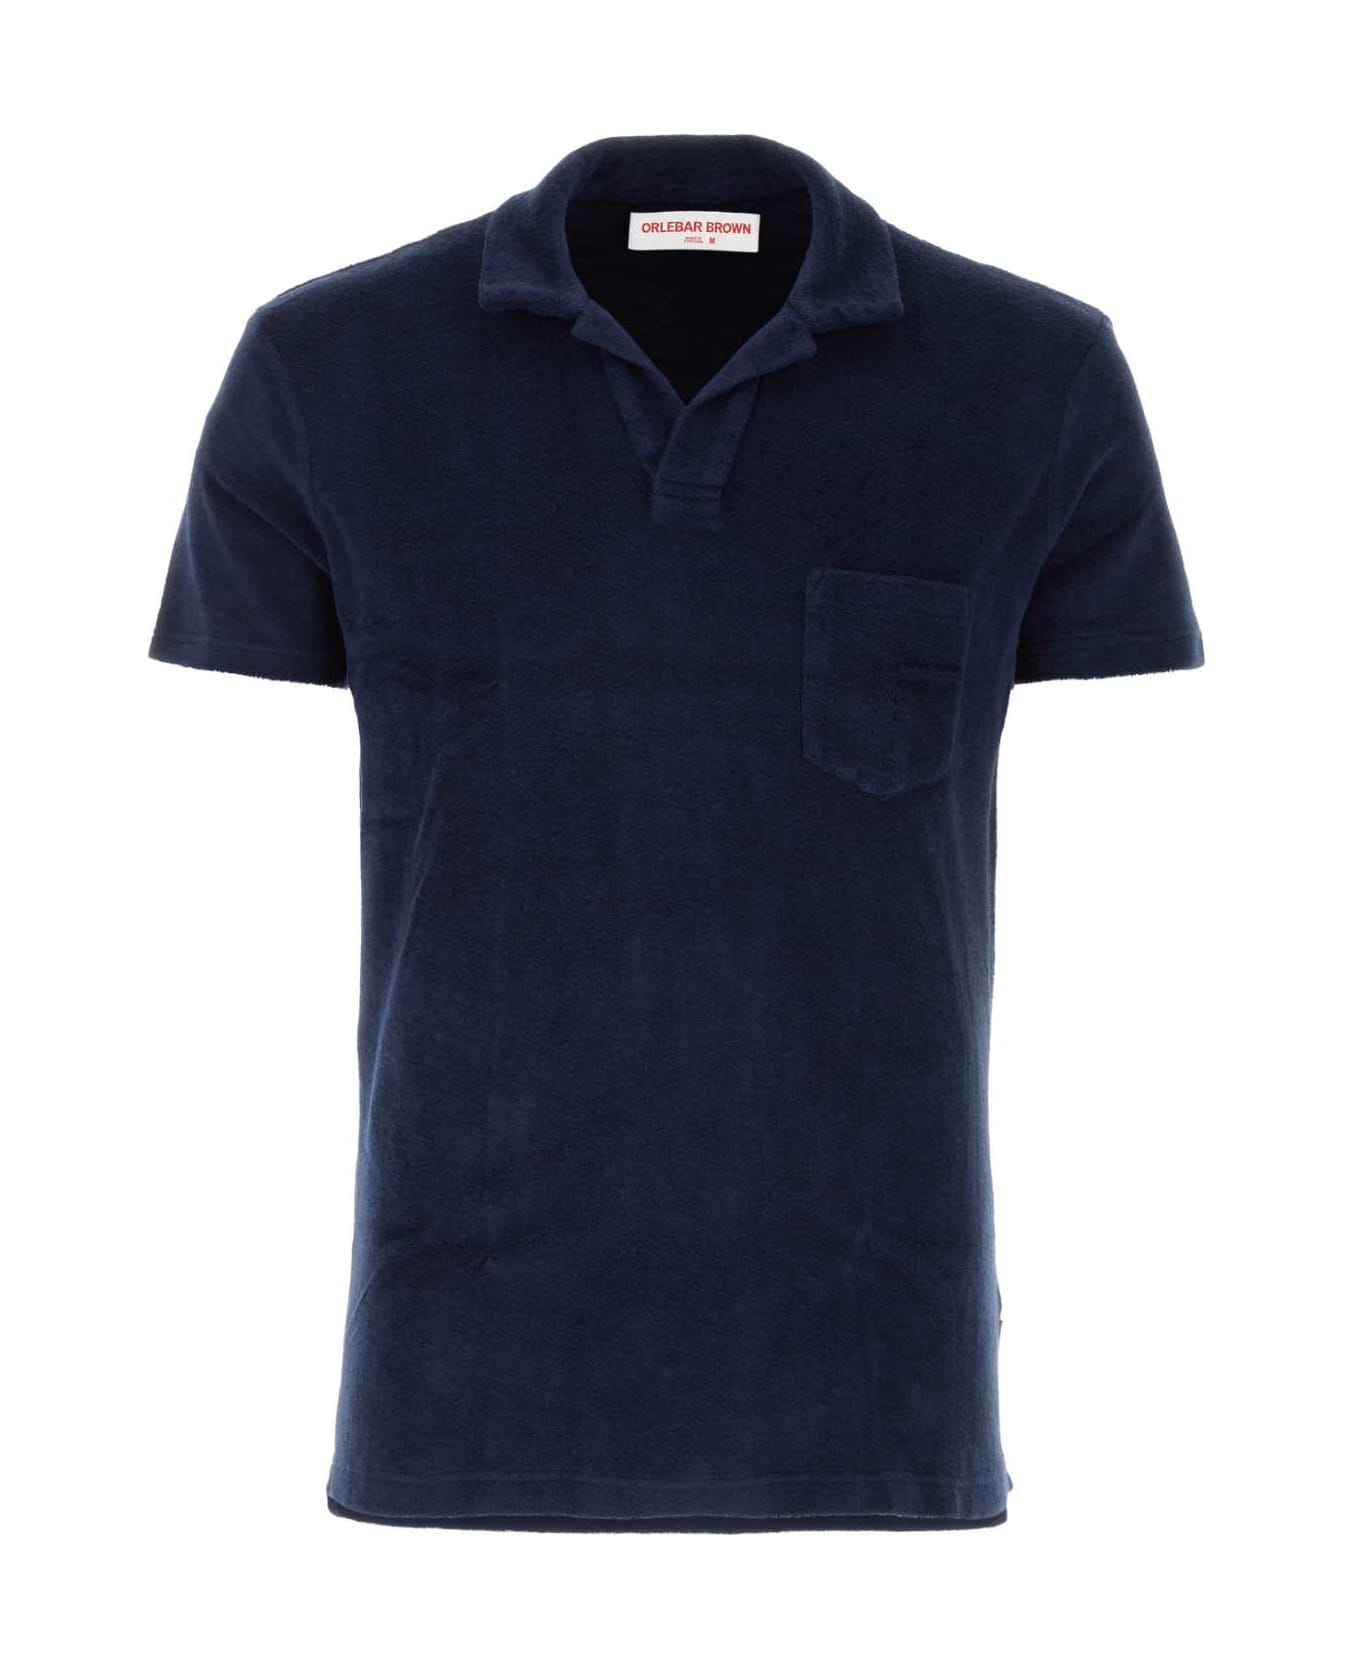 Orlebar Brown Navy Blue Terry Fabric Terry Polo Shirt - NAVY ポロシャツ